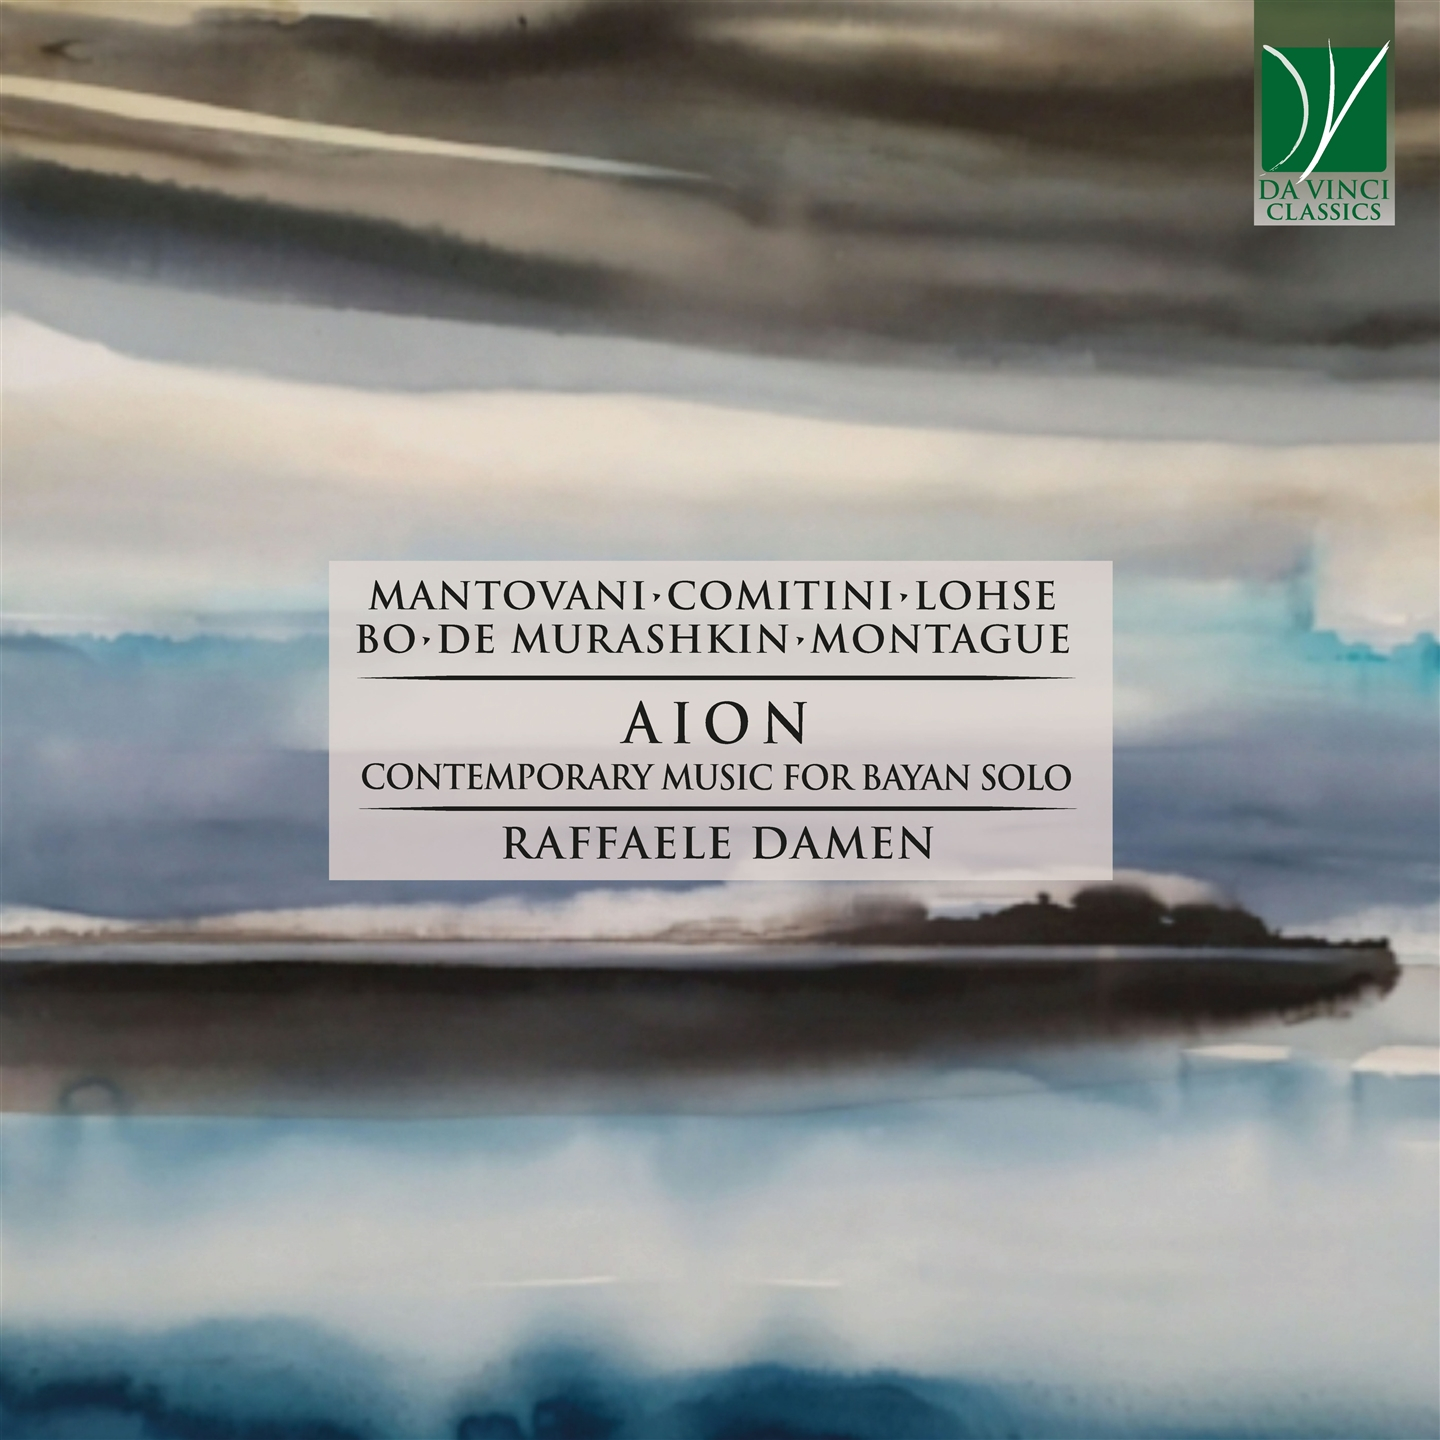 AION, CONTEMPORARY MUSIC FOR BAYAN SOLO